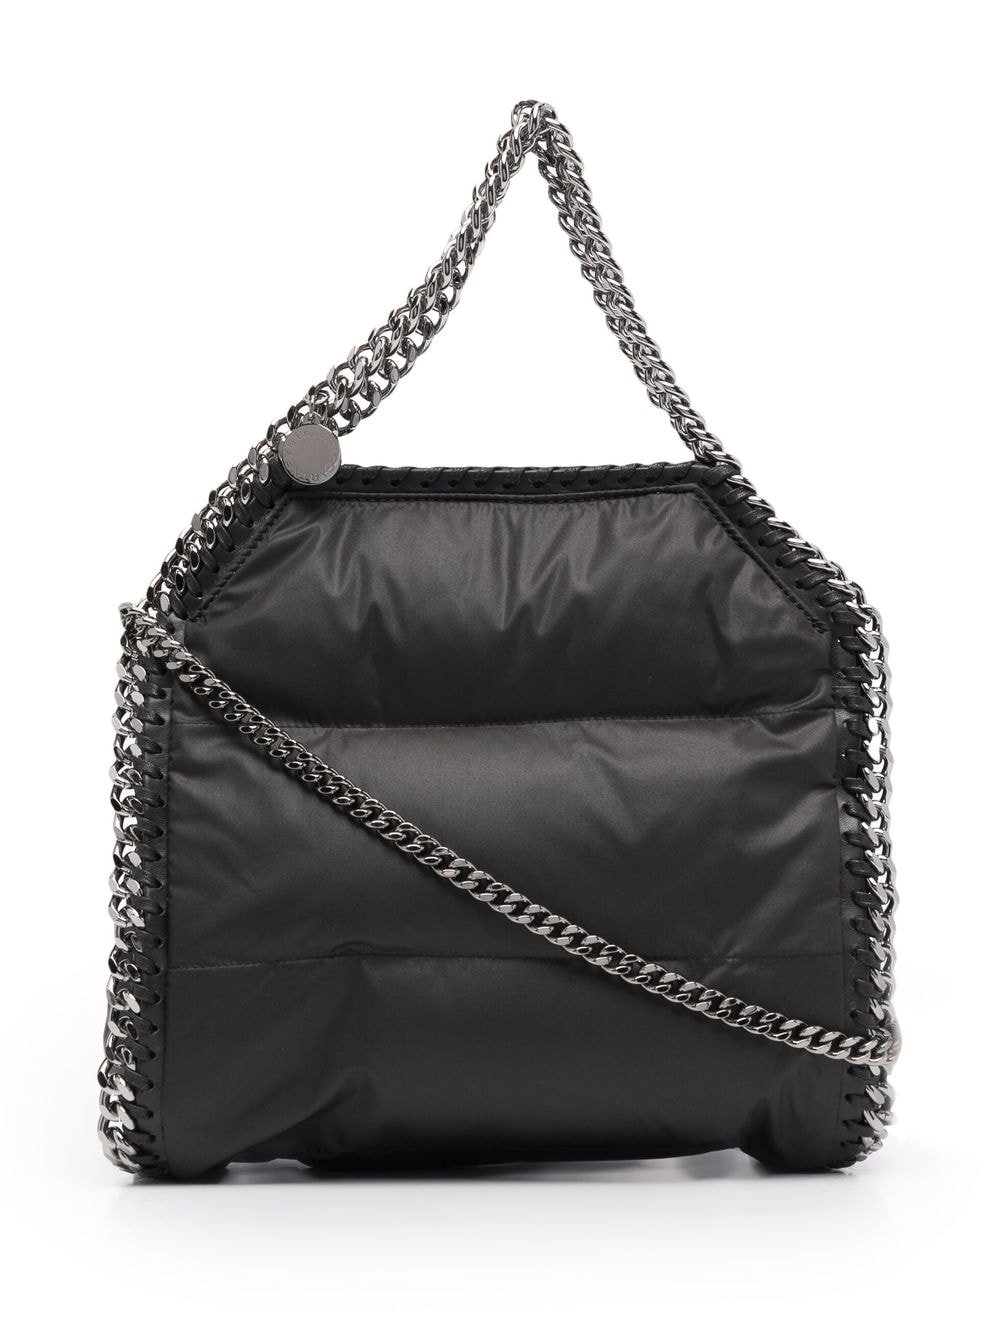 Stella McCartney small Falabella quilted tote bag - Black